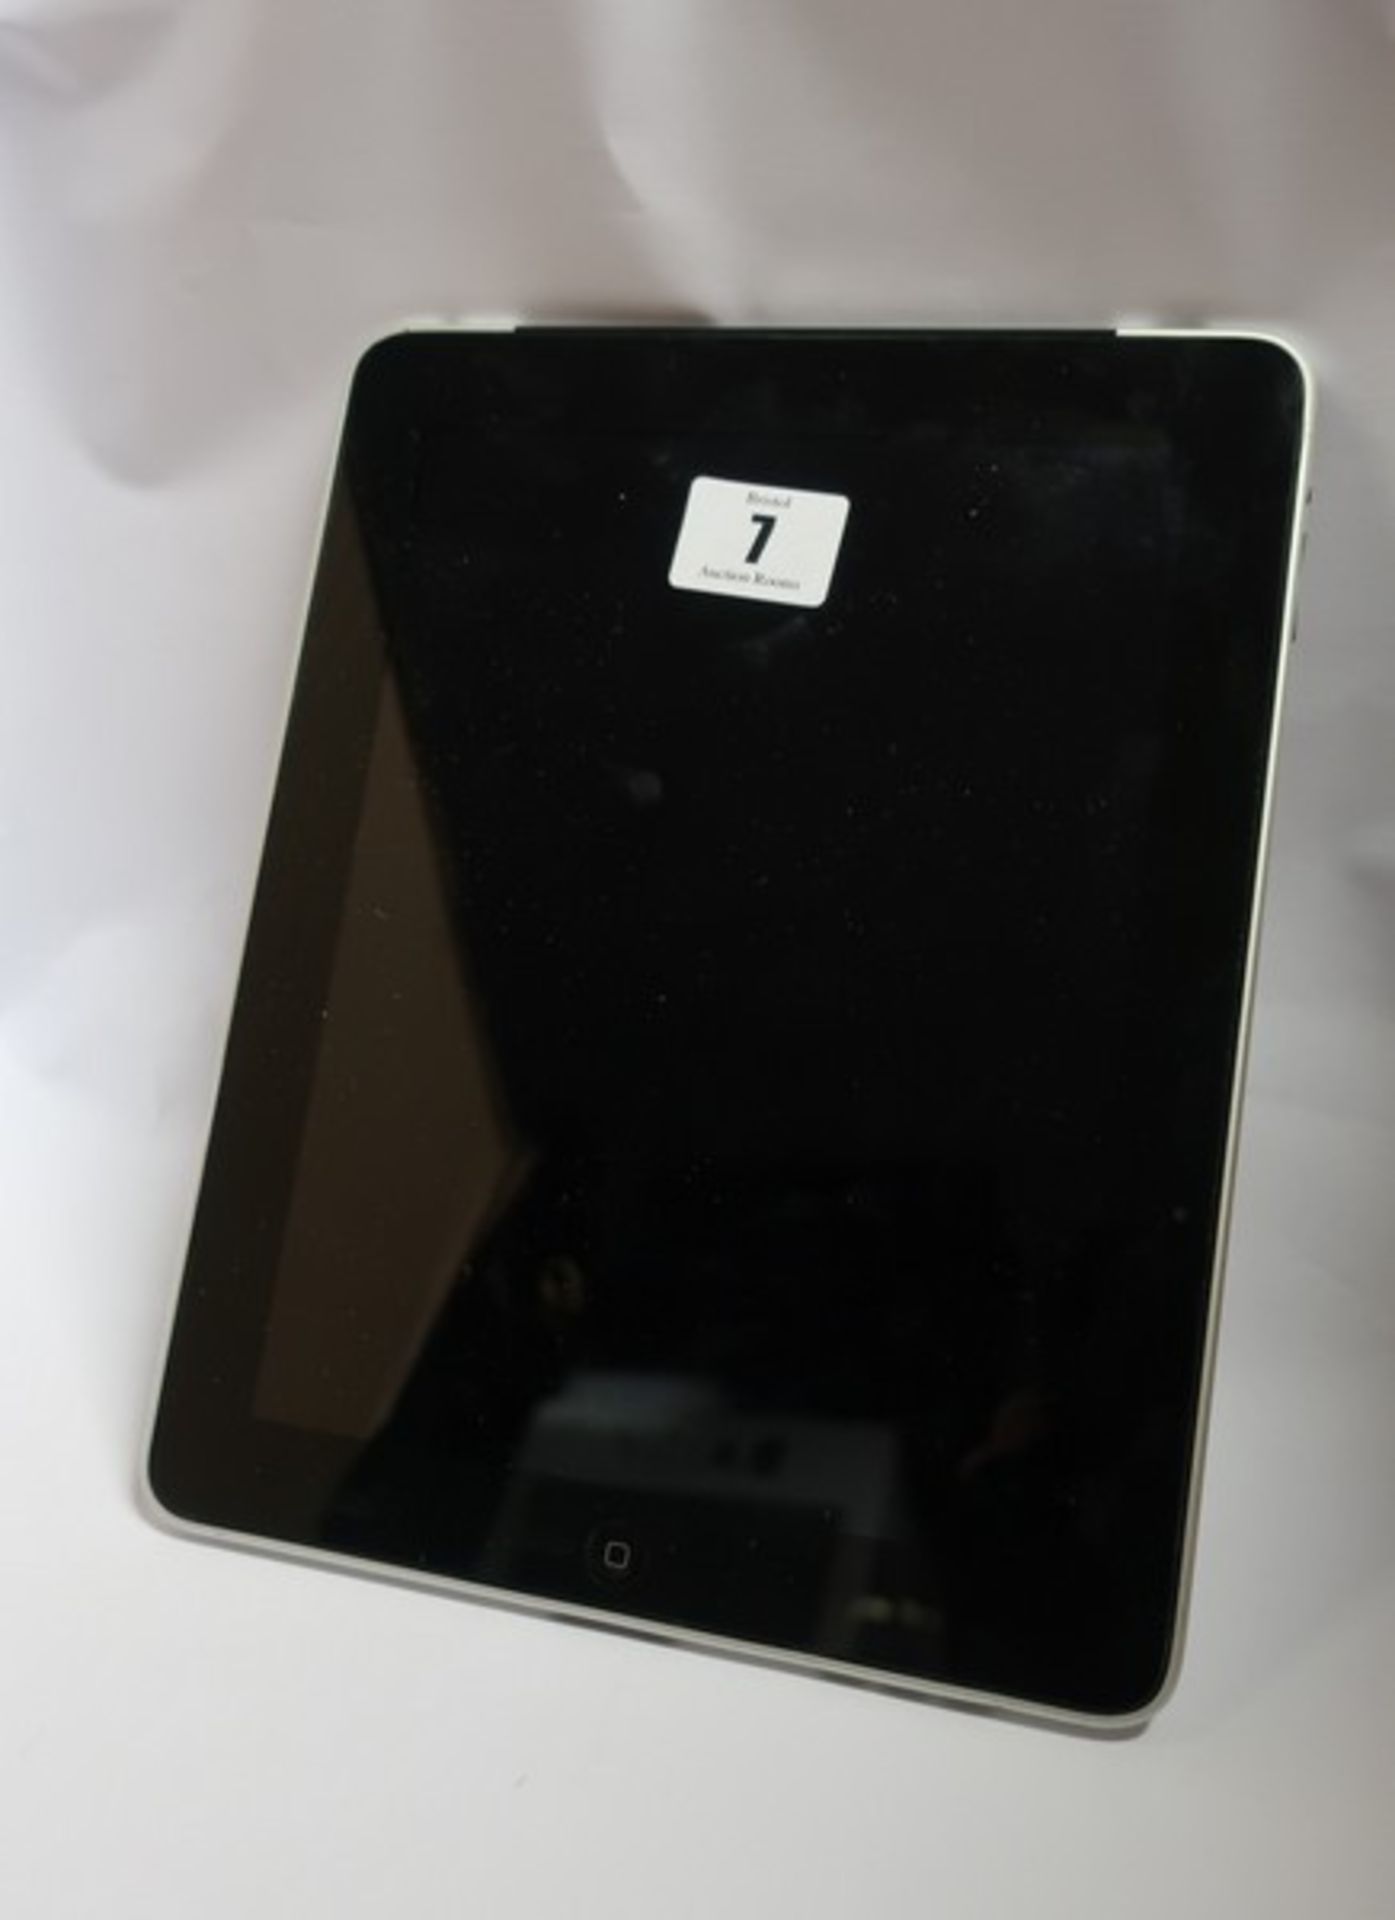 An Apple iPad 1st Gen (Wi-Fi/3G/GPS) A1337 64GB (IMEI: 012223000730618) (Activation clear).